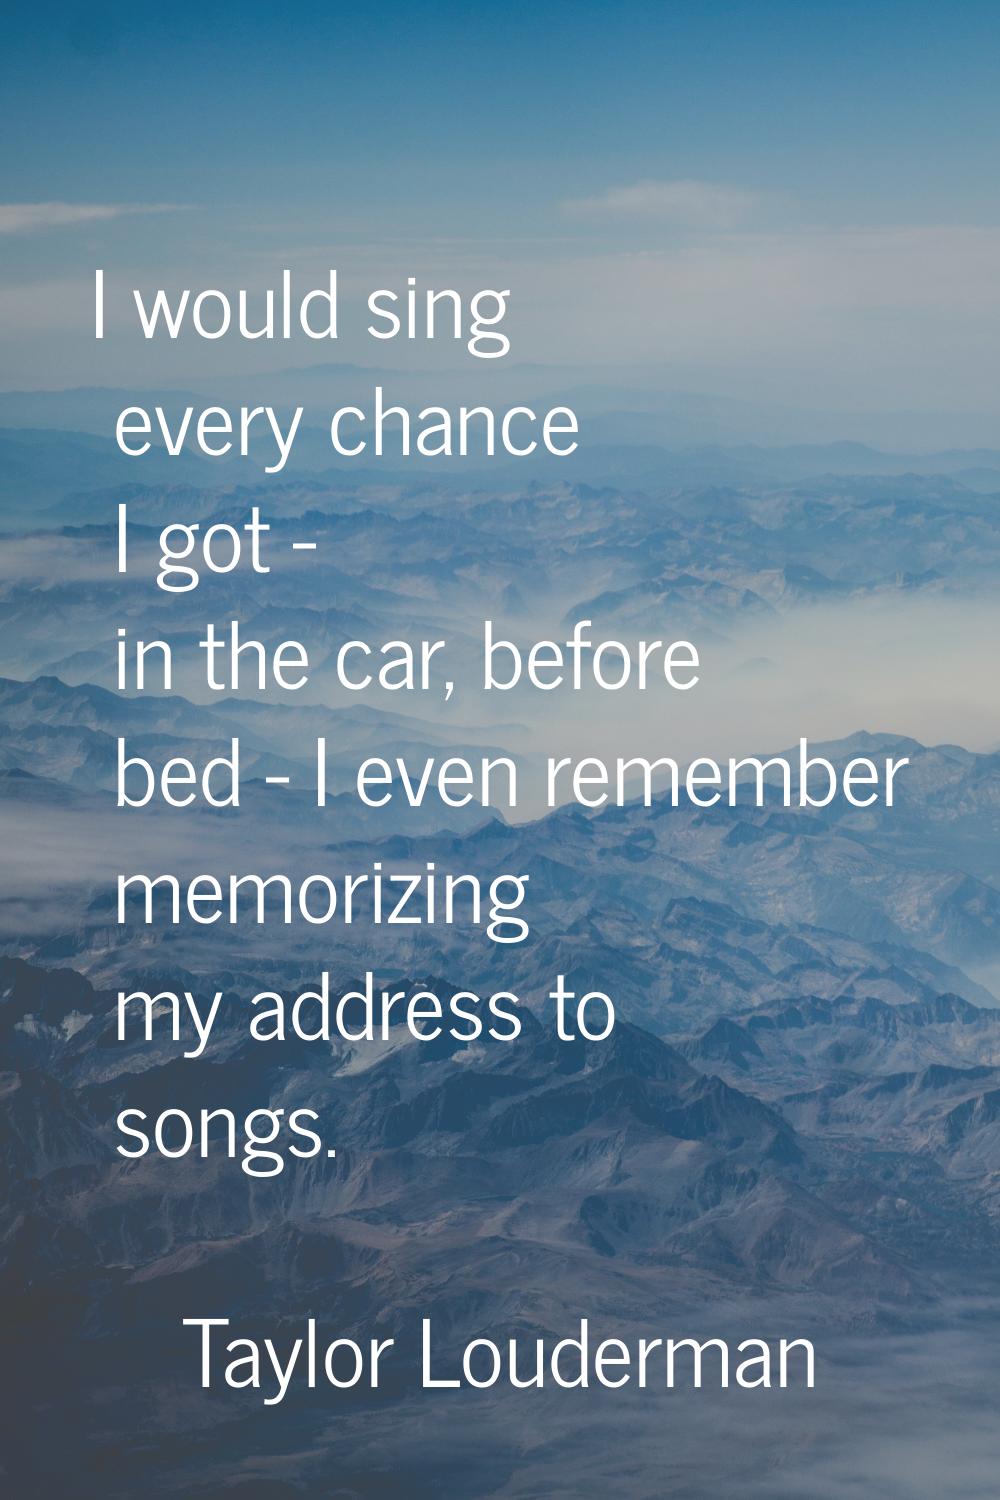 I would sing every chance I got - in the car, before bed - I even remember memorizing my address to